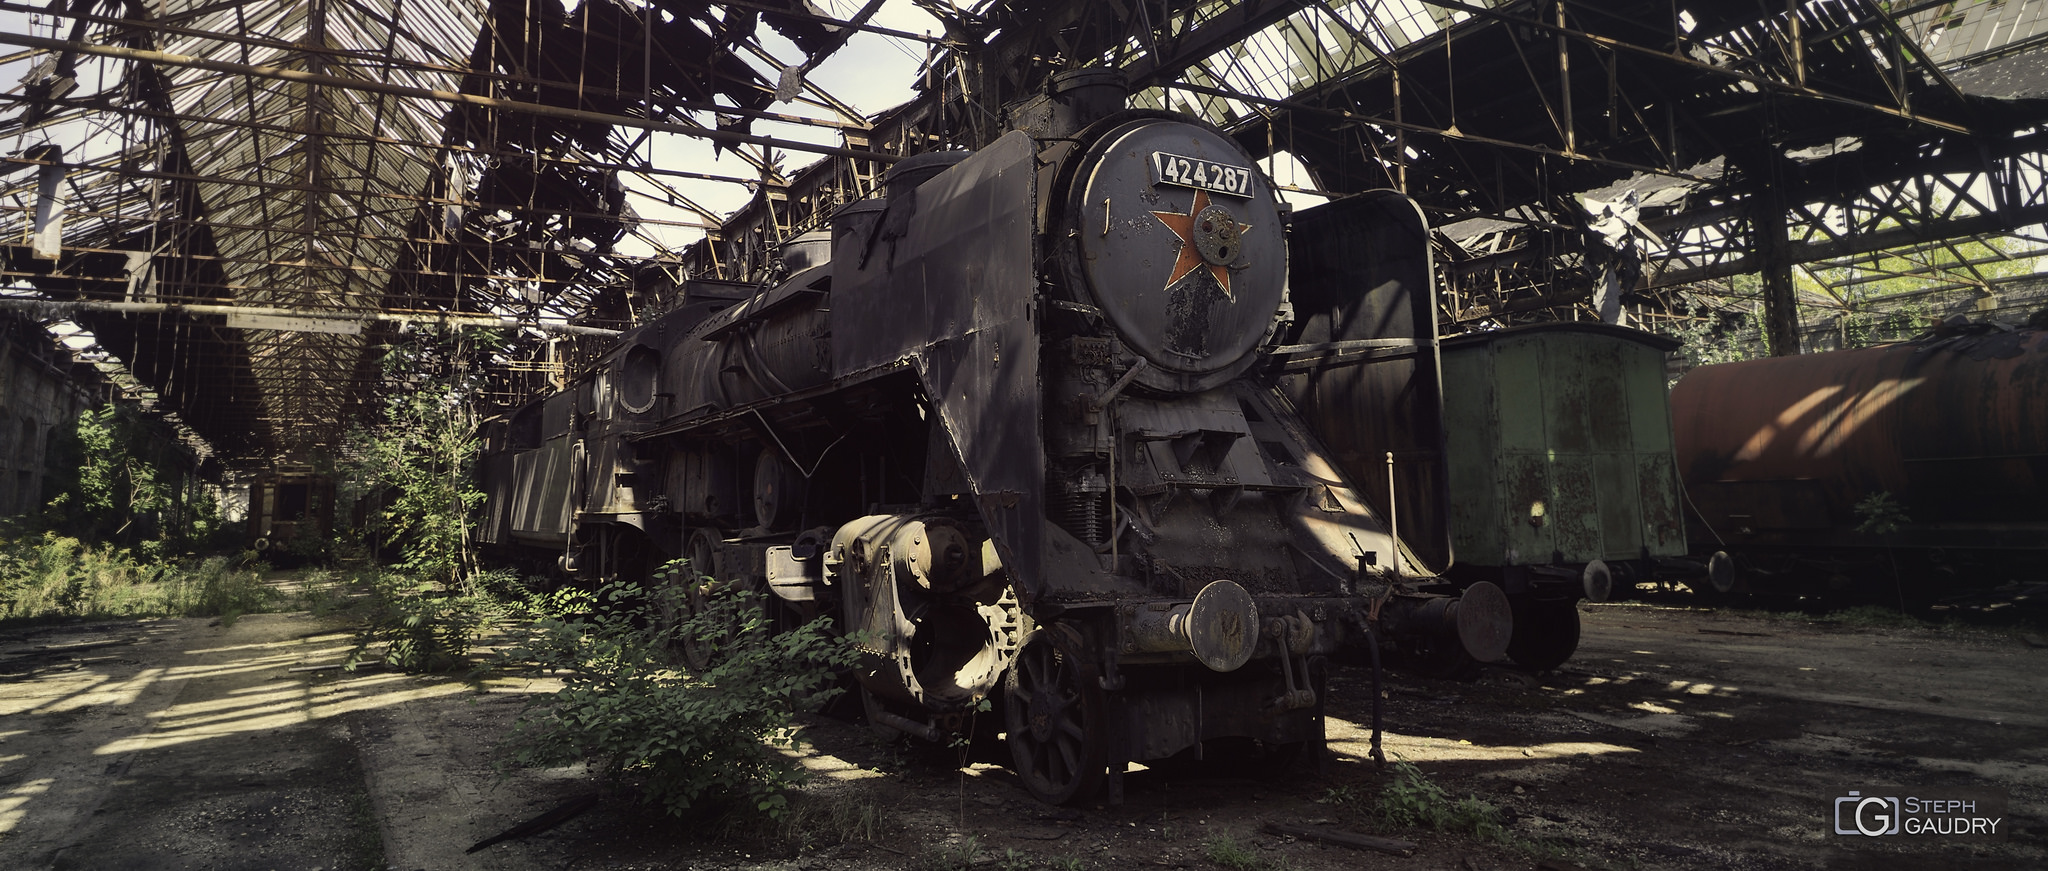 MÁV 424-287 (Abandoned Red star train)